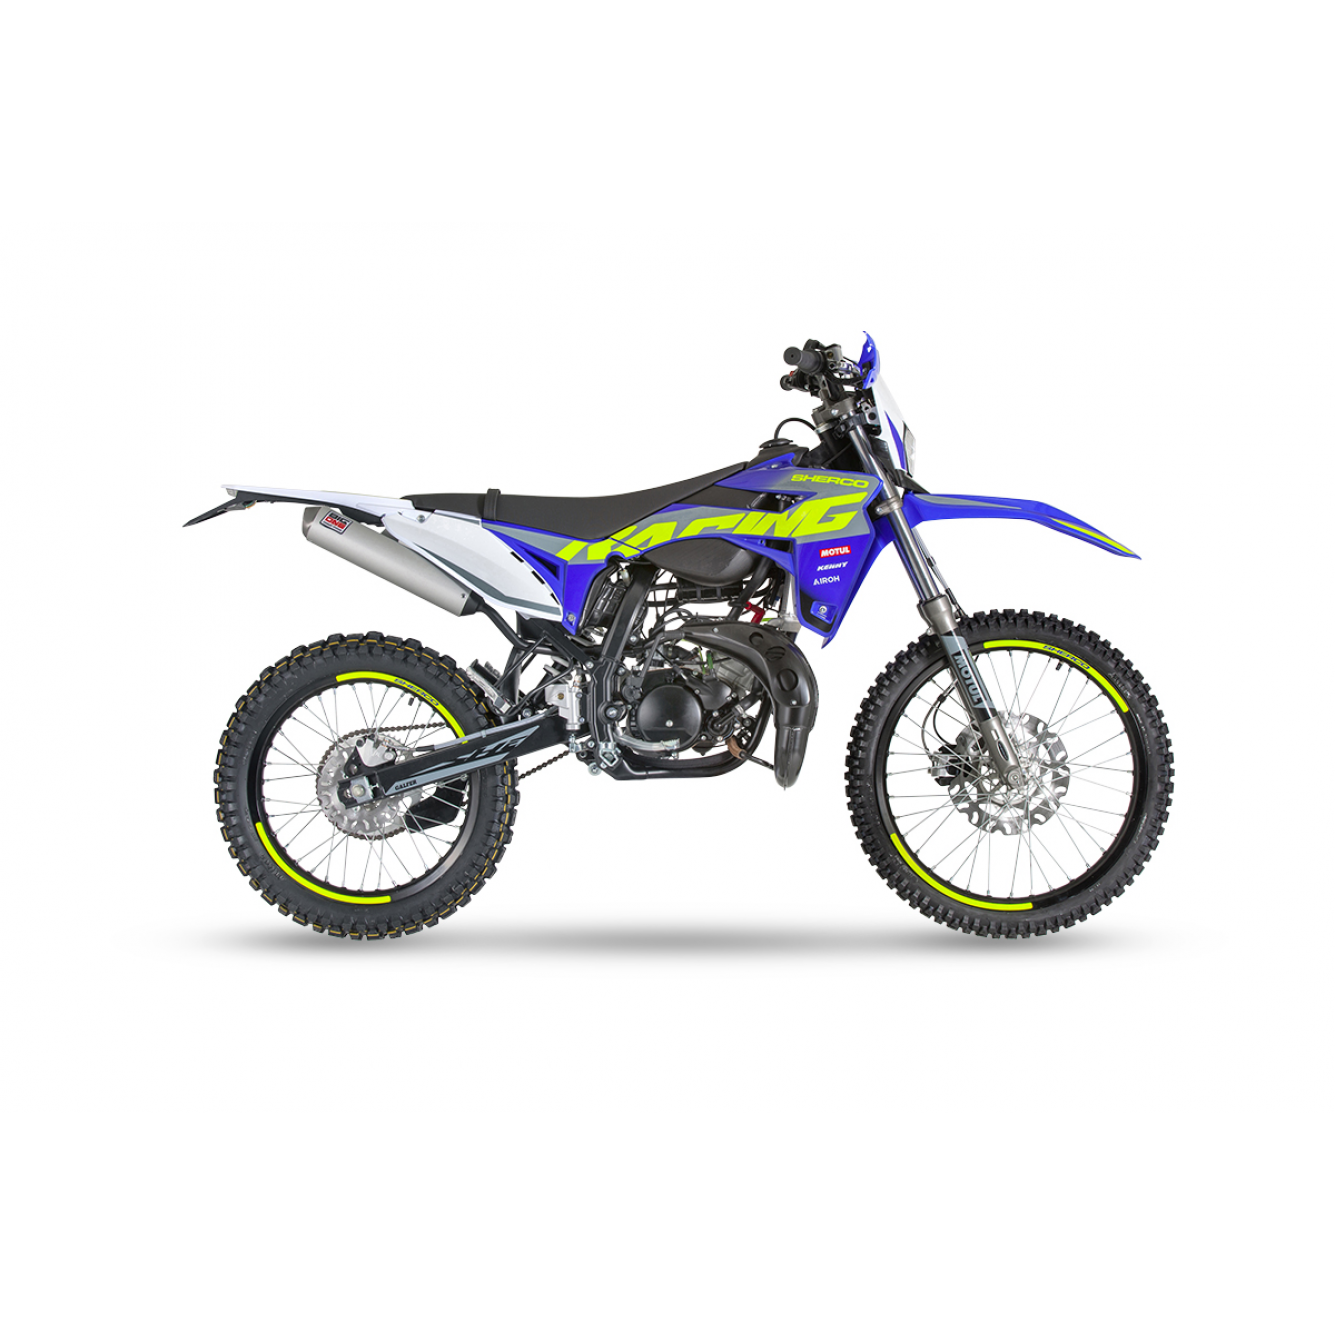 Sherco | Brommer 50 SE-R Factory